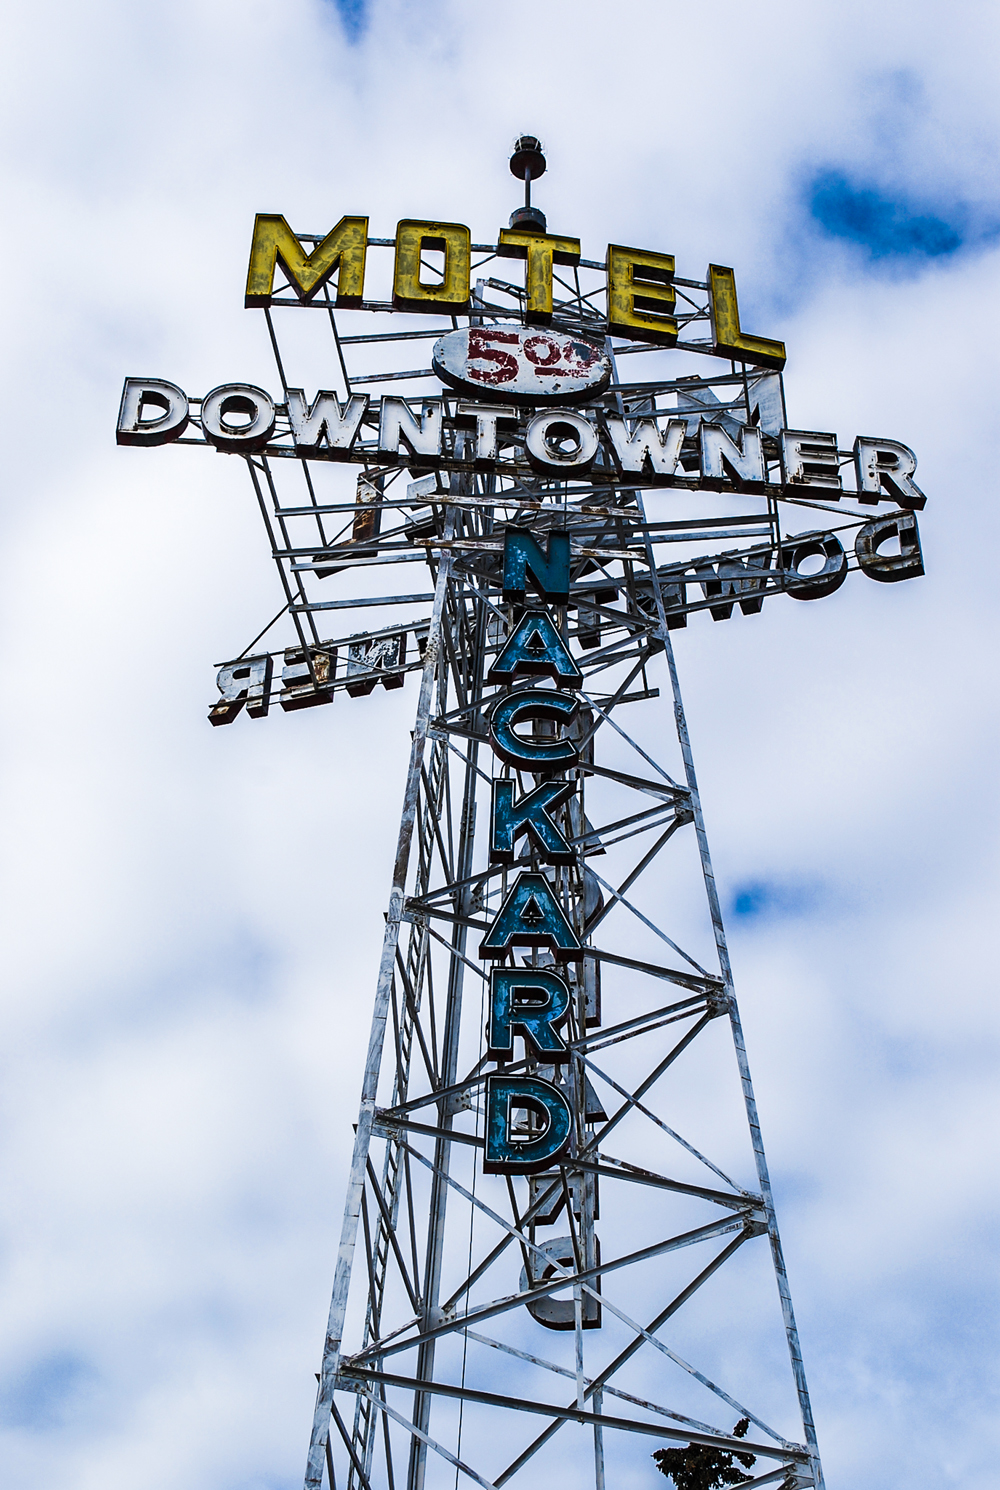 photograph of the Downtowner Motel sign in Flagstaff Arizona